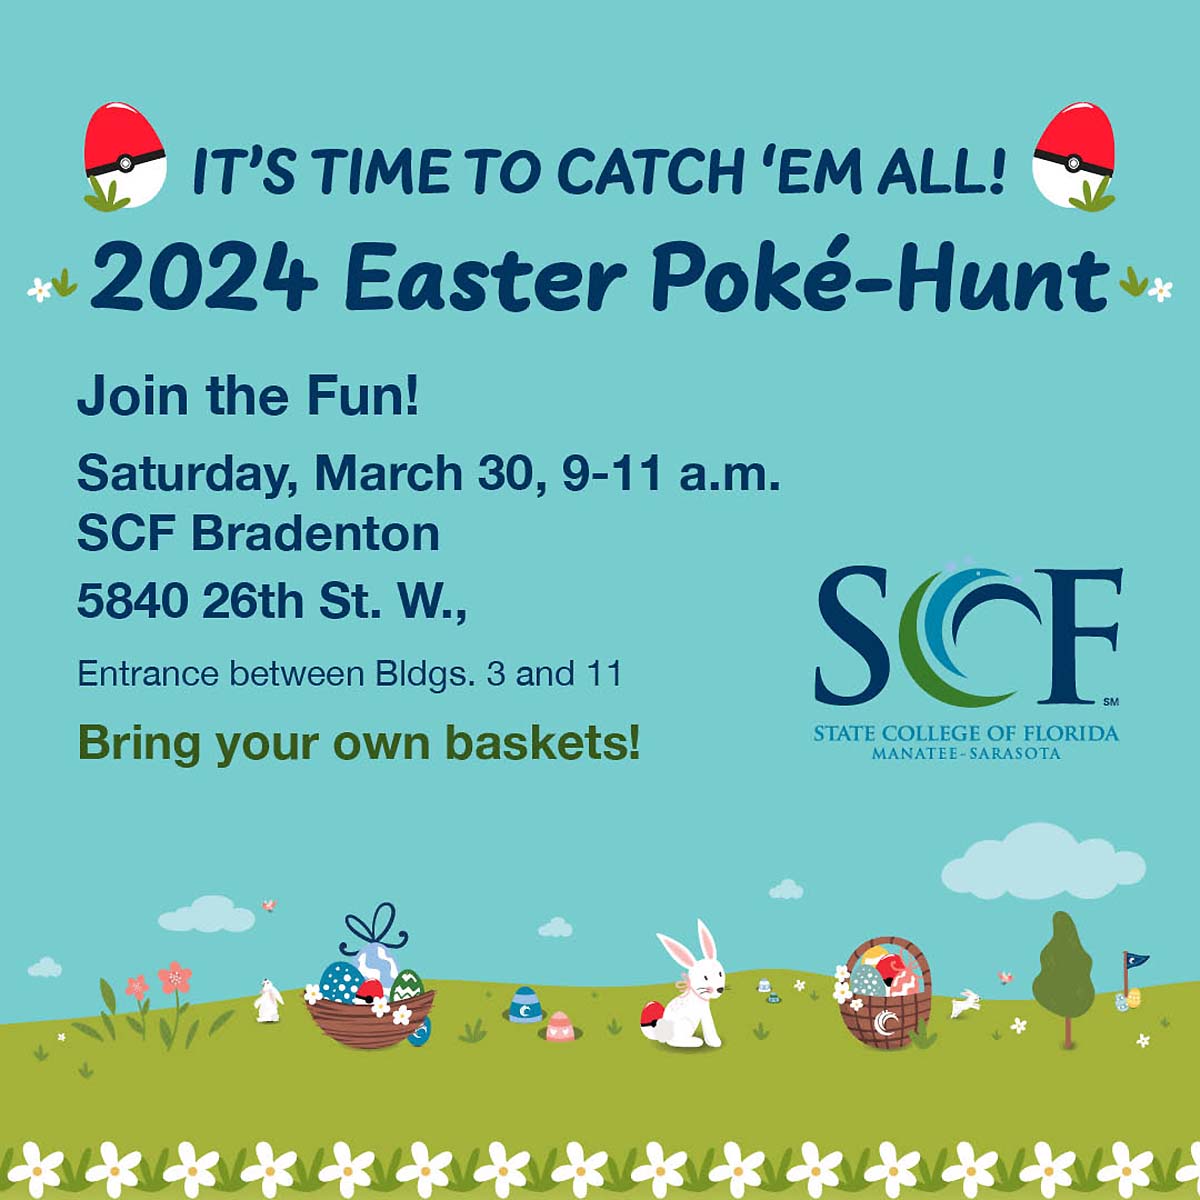 Easter Poke-Hunt Offers Fun for the Whole Family at SCF Bradenton